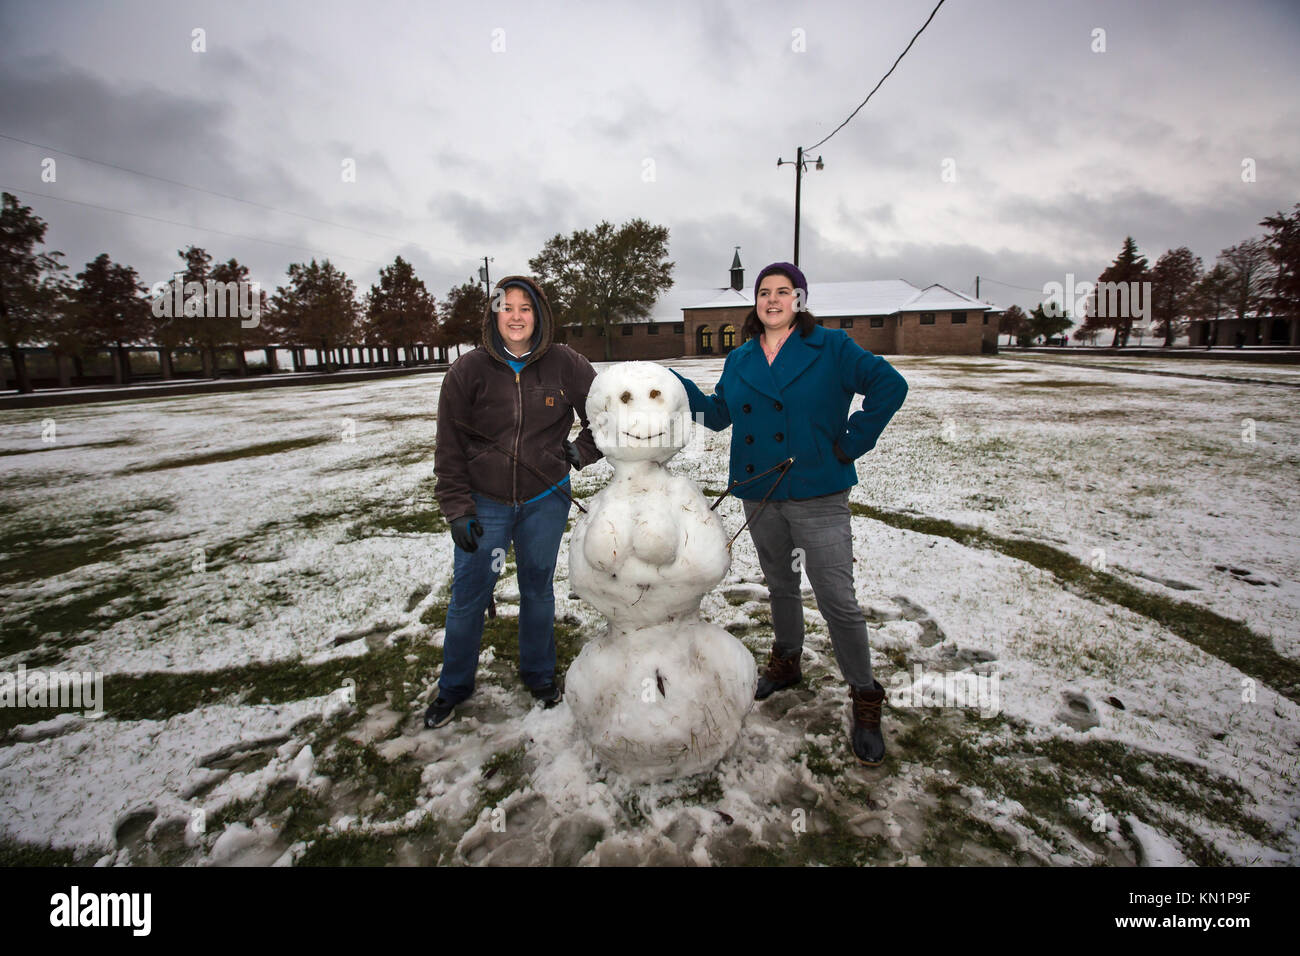 Mandeville, Louisiana, USA. 8th Dec, 2017. SNOW FALLS IN SOUTHERN LOUISIANA on the shore of Lake Pontchartrain in Fontainebleau State Park on Dec. 8, 2017. Molly Ganger and Rose Highnote pose with a snowman they built in the late afternoon. A wintry mix of precipitation fell across several Deep South states causing many businesses and schools to shut down. Credit: Julie Dermansky/ZUMA Wire/Alamy Live News Stock Photo